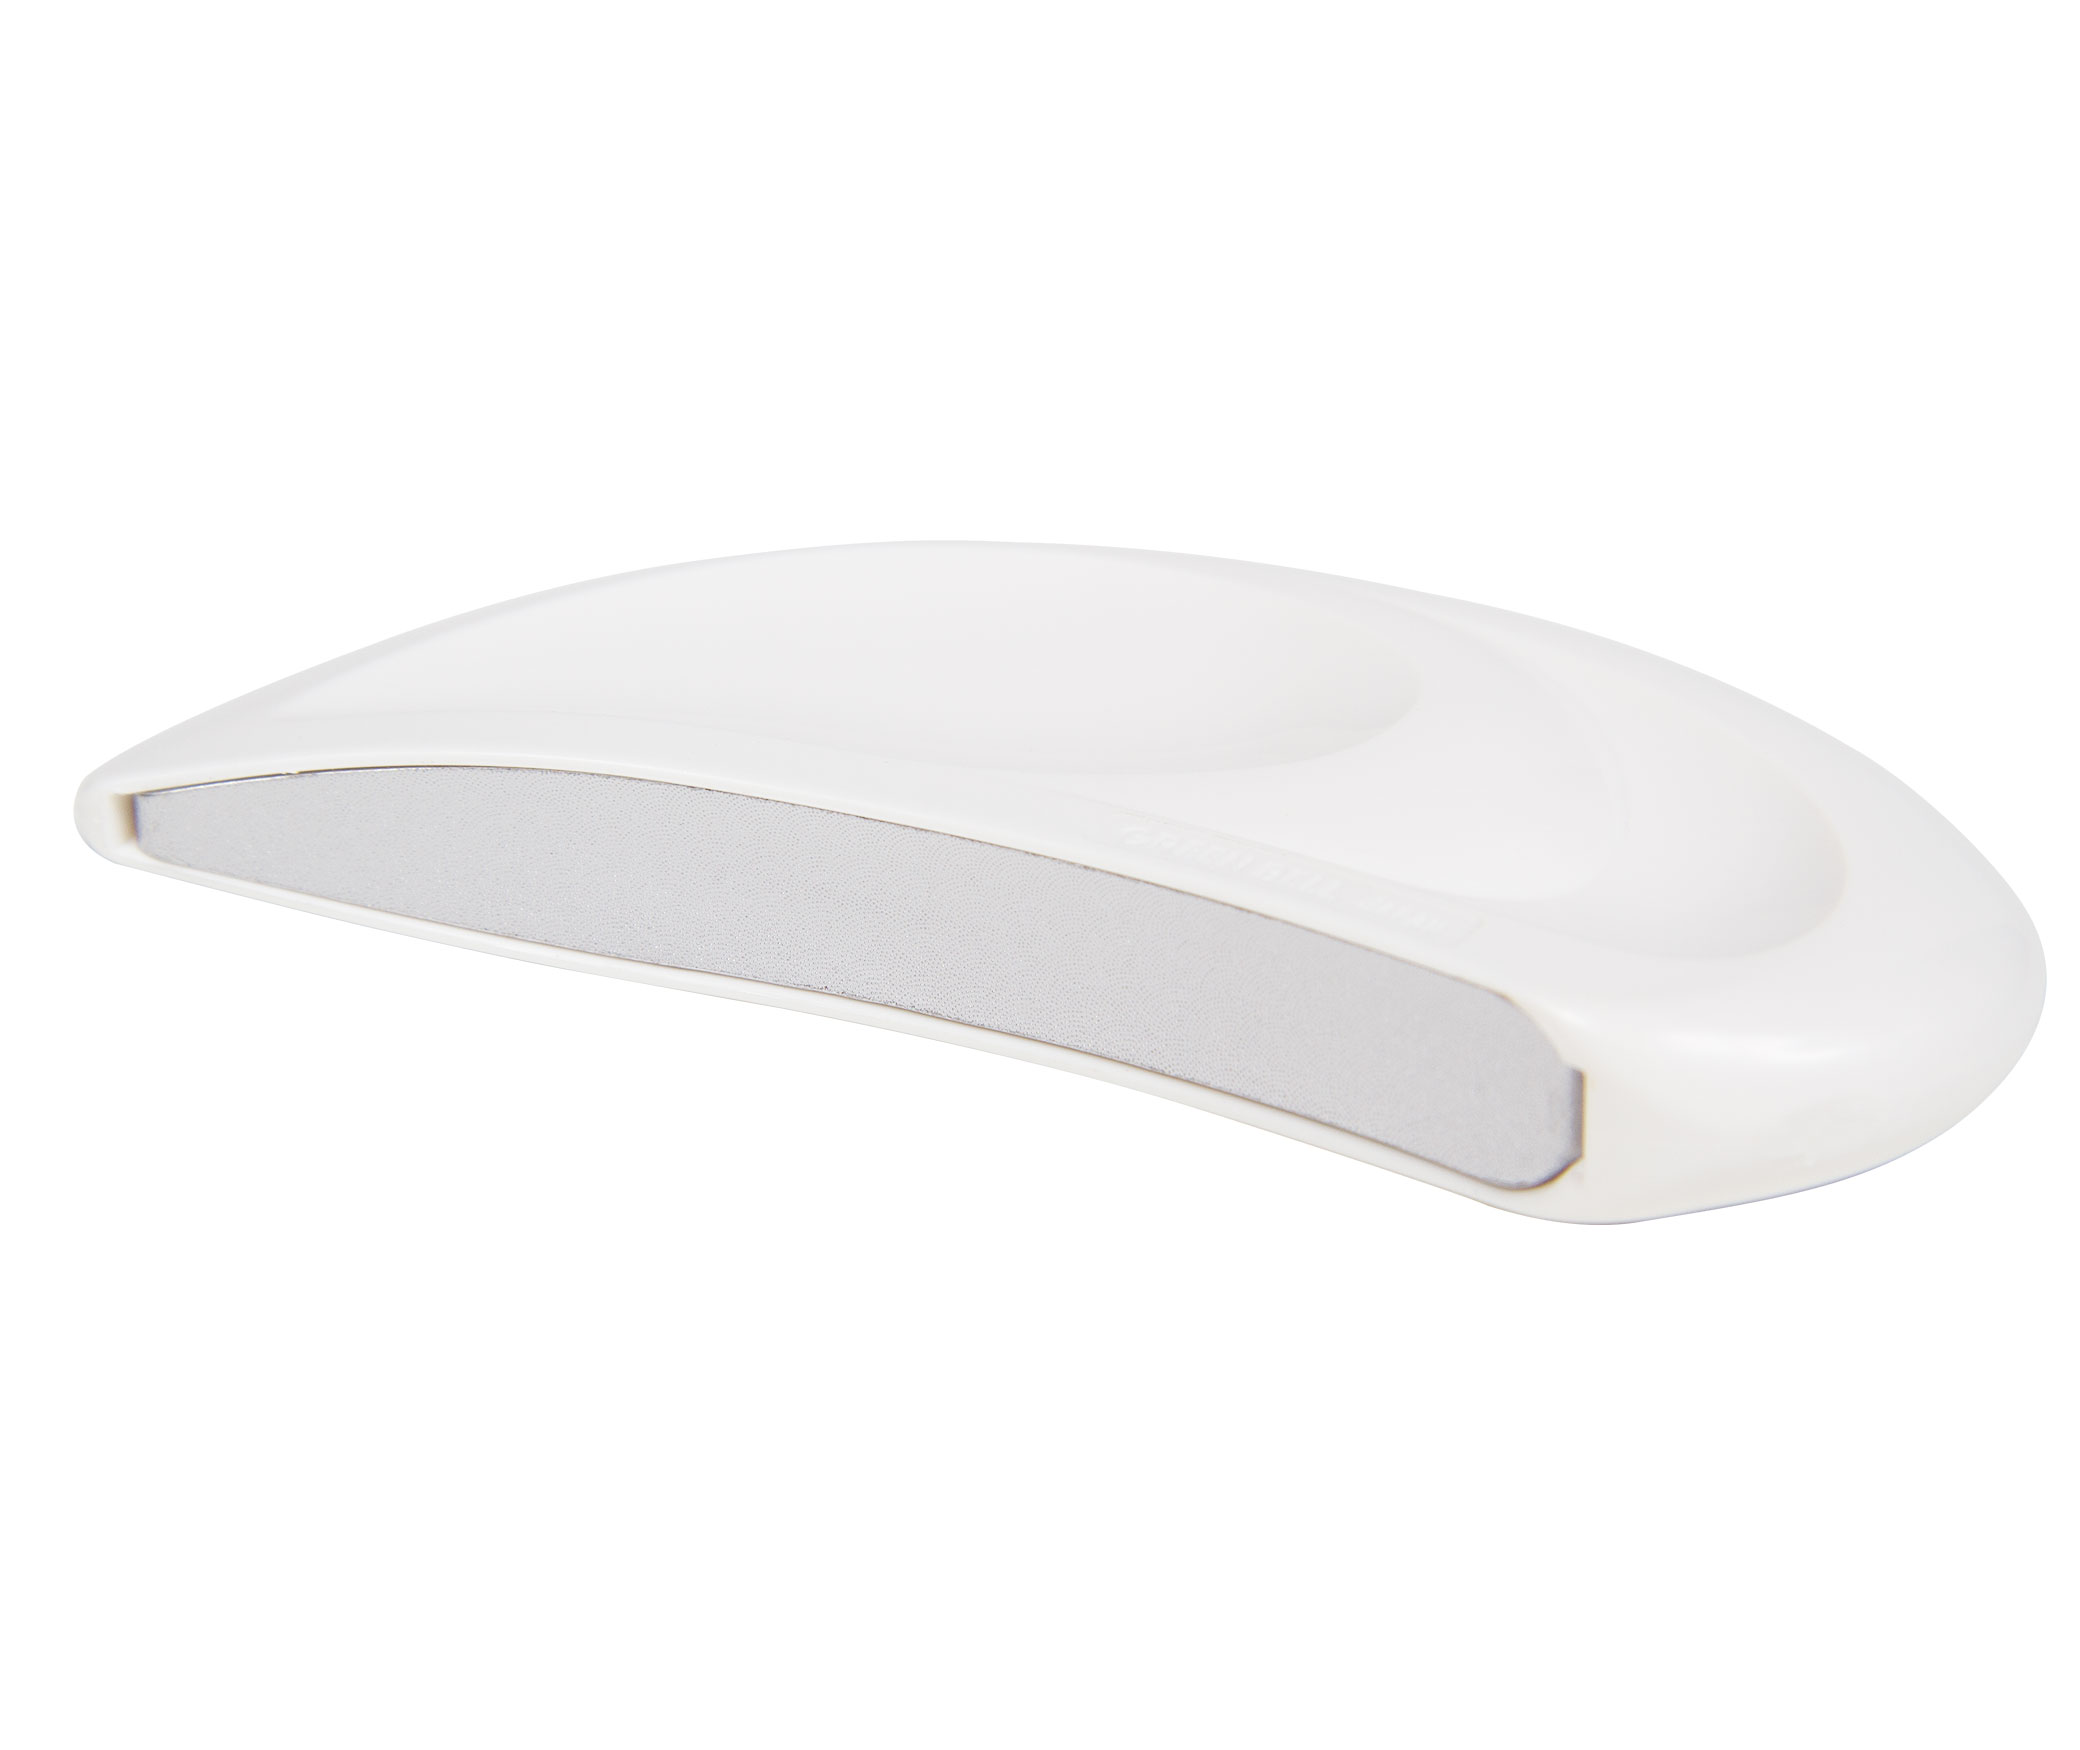 Seki Edge Large Rounded Nail File (SS-405) safe for children and older adults